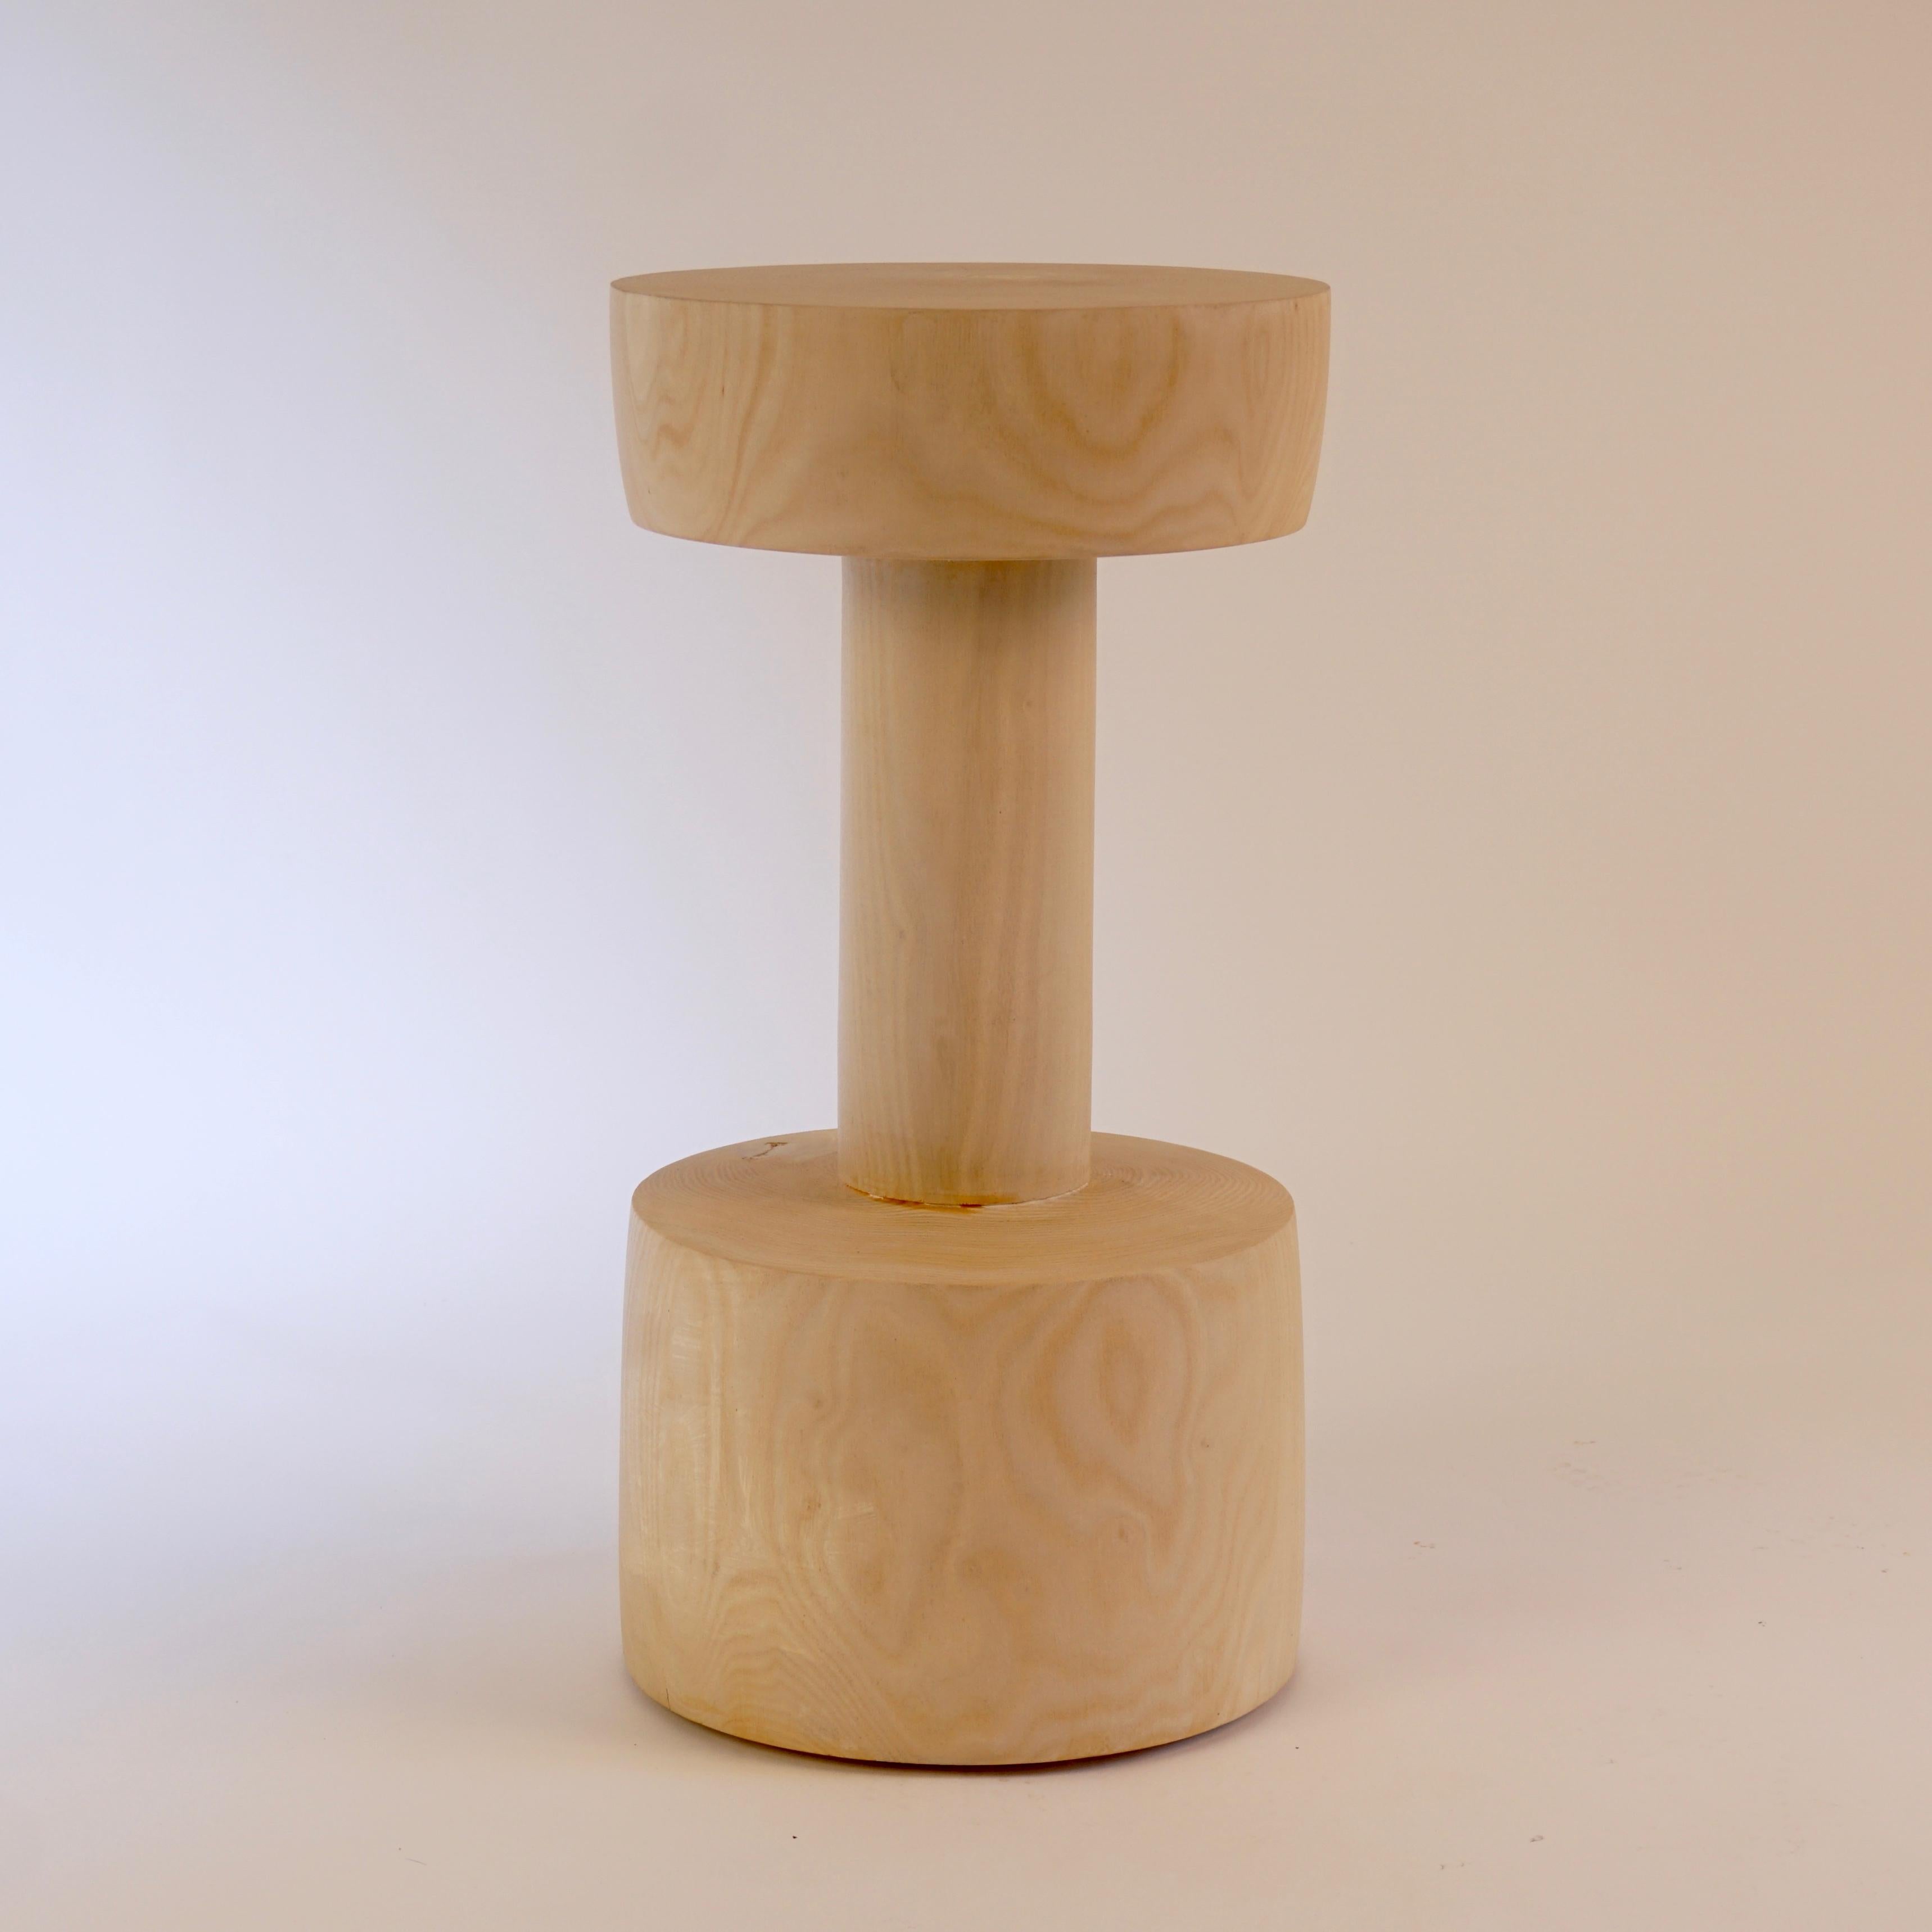 This custom version of the #14 Pedestal, one of the ten original shapes in the Lehrecke Pedestal collection from 1996, is bleached catalpa, made from a log from the Hudson Valley, in New York State.

All of Lehrecke's Pedestals are made on a custom